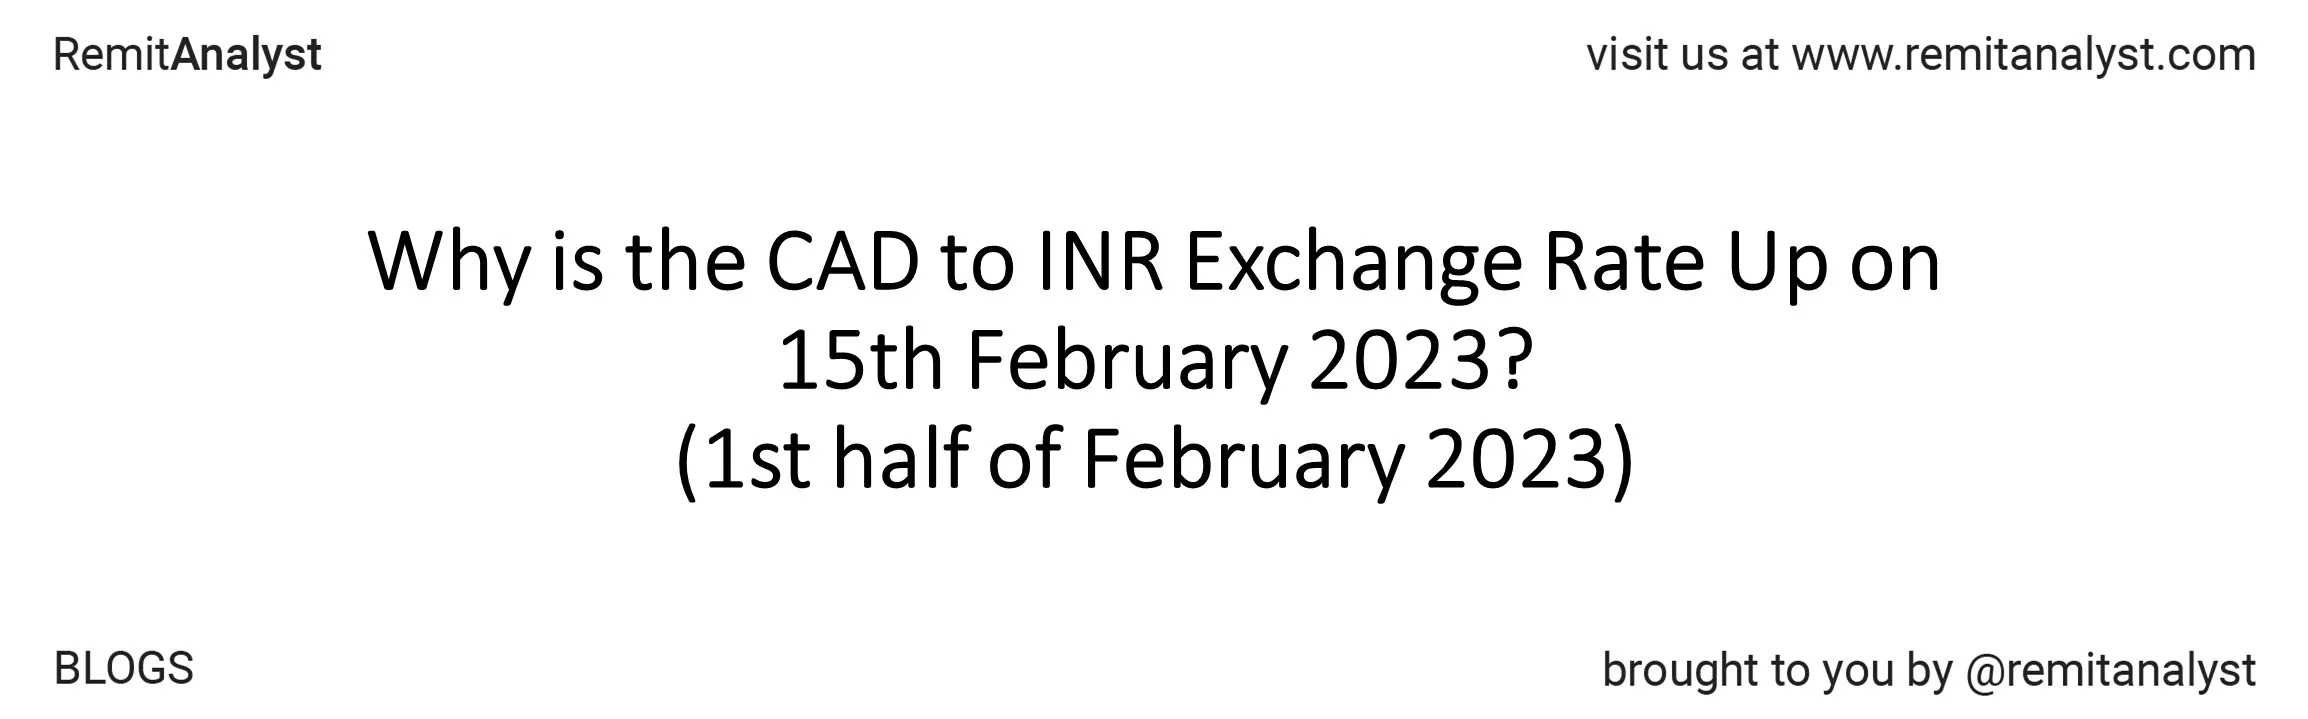 cad-to-inr-exchange-rate-from-1-feb-2023-to-15-feb-2023-title